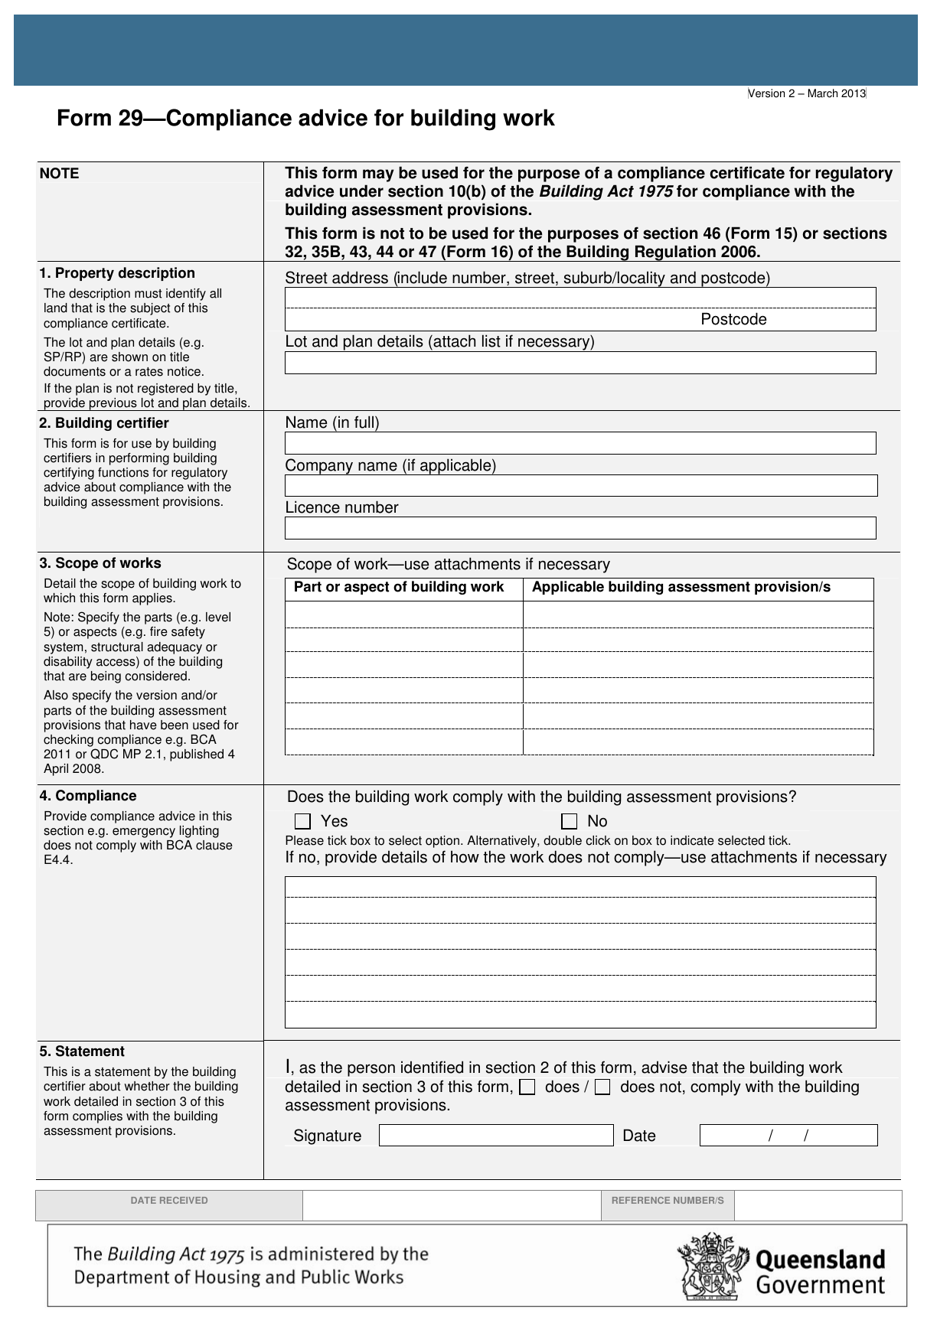 Form 29 Compliance Advice for Building Work - Queensland, Australia, Page 1